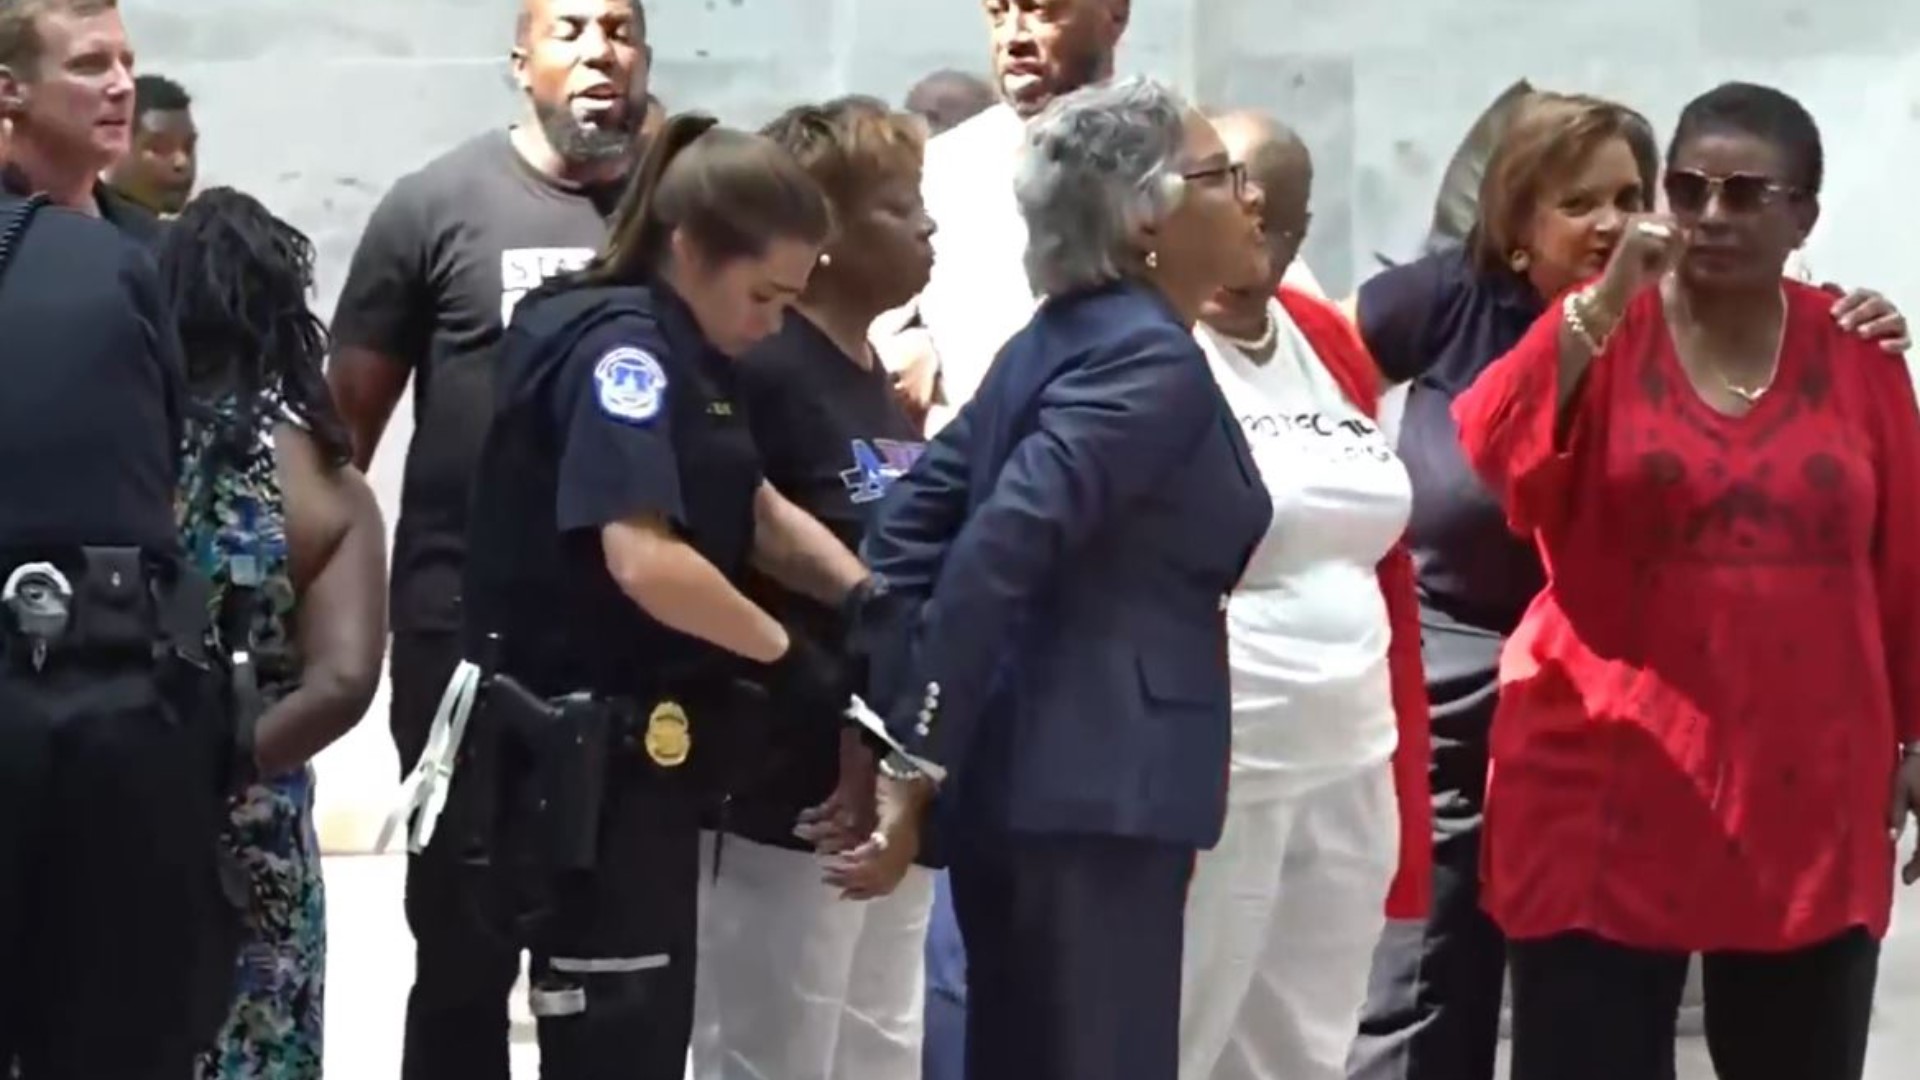 Congresswoman Joyce Beatty was detained by Capitol Police during a voting rights protest at the Hart Senate Office Building.